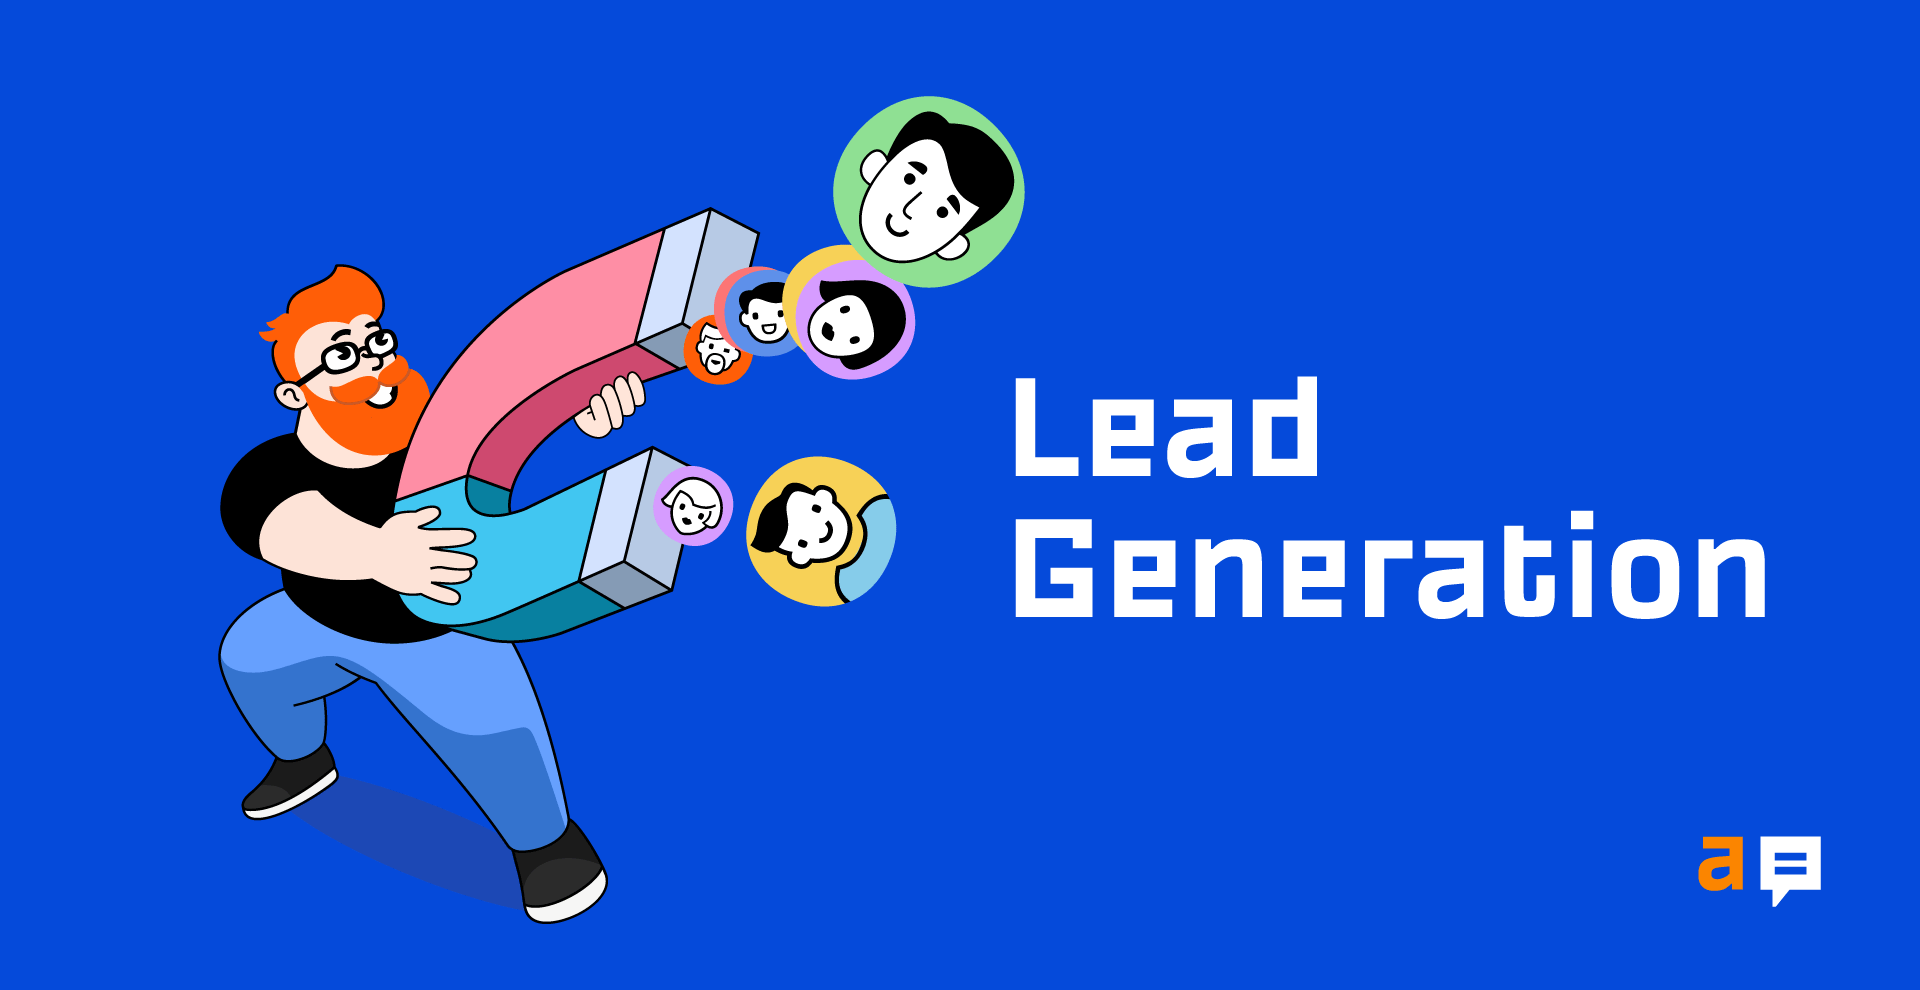 13 B2B Lead Generation Strategies to Know for 2021 - Bython